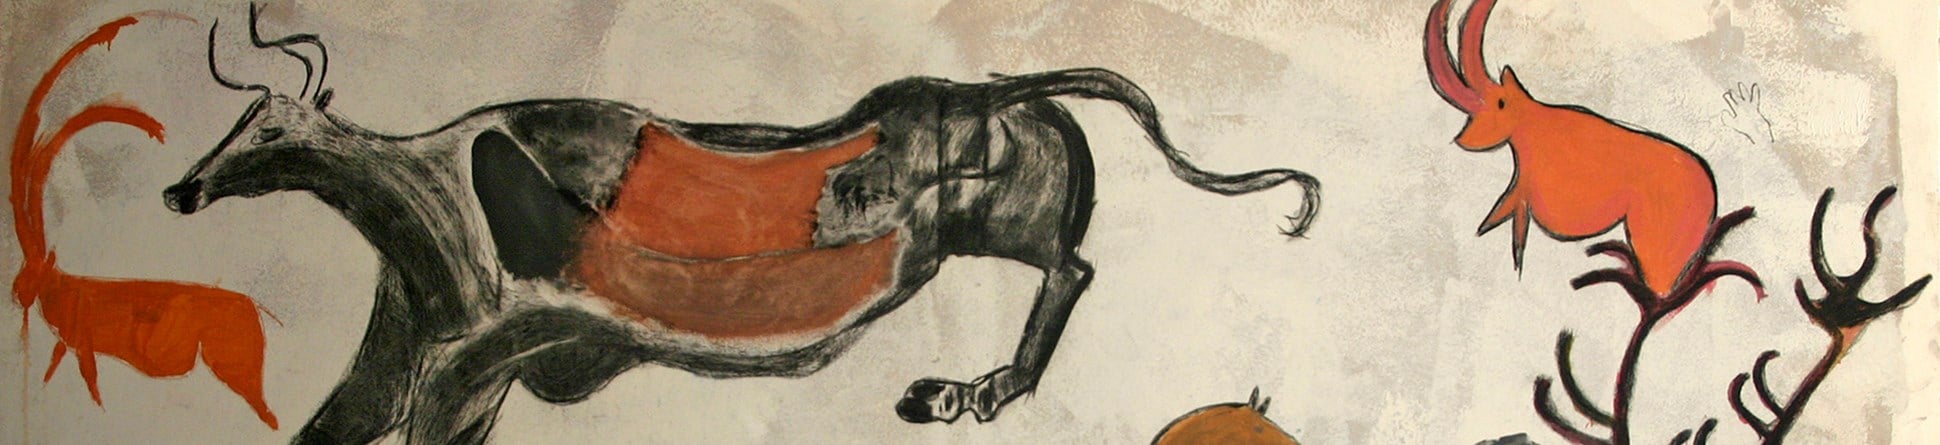 Detail of animals drawn by children in the style of a prehistoric cave painting